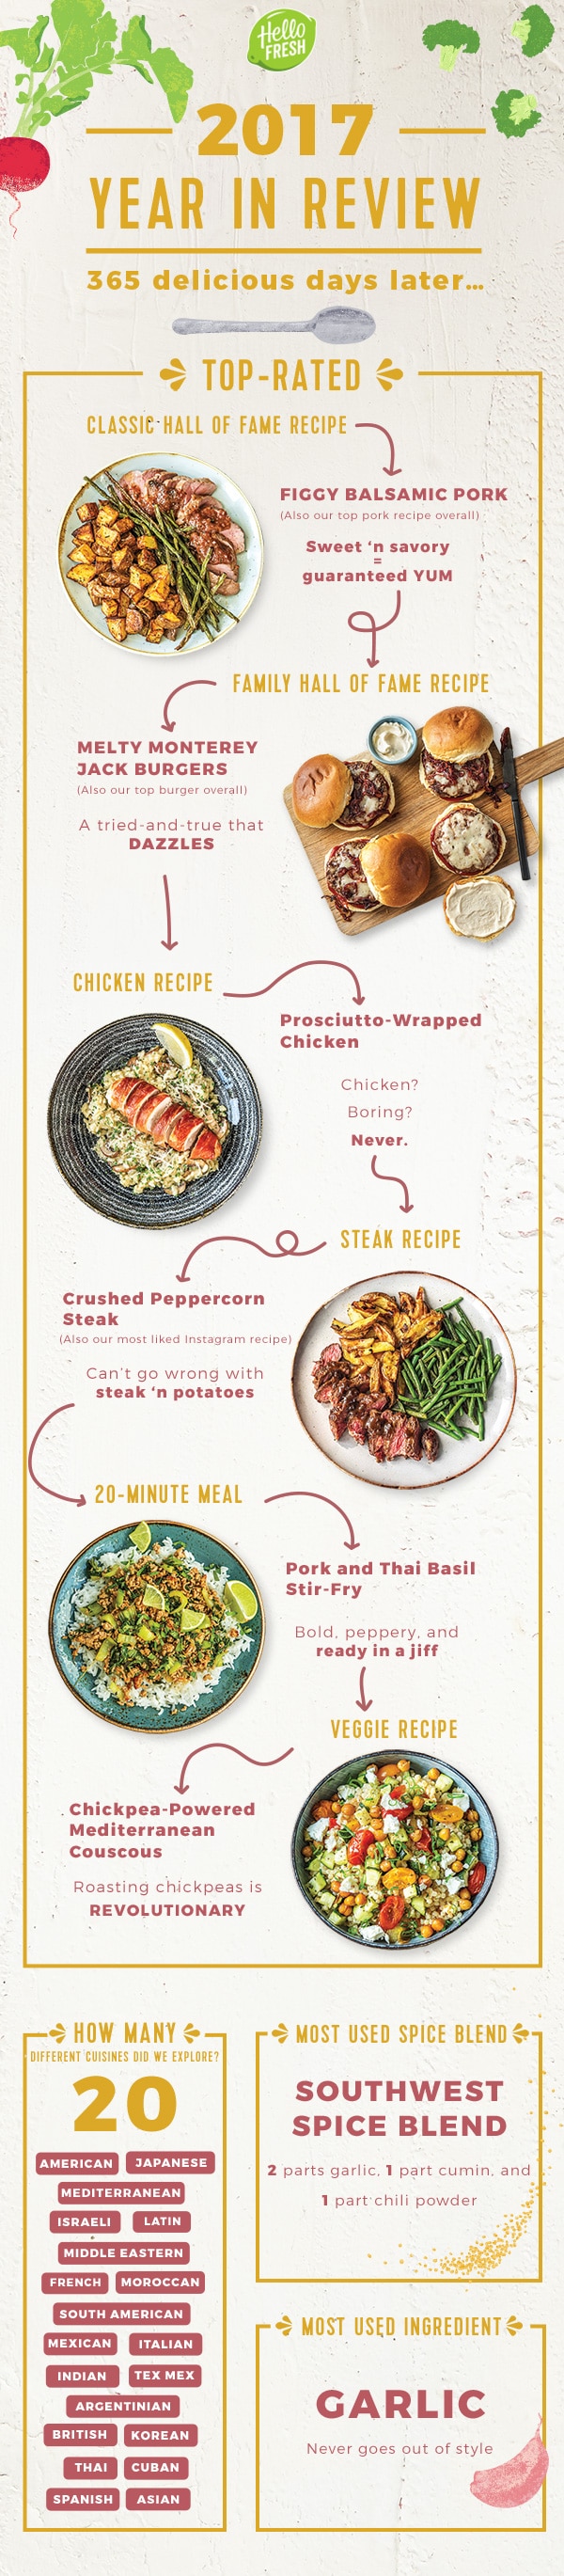 2017 year in review-HelloFresh-2017-infographic